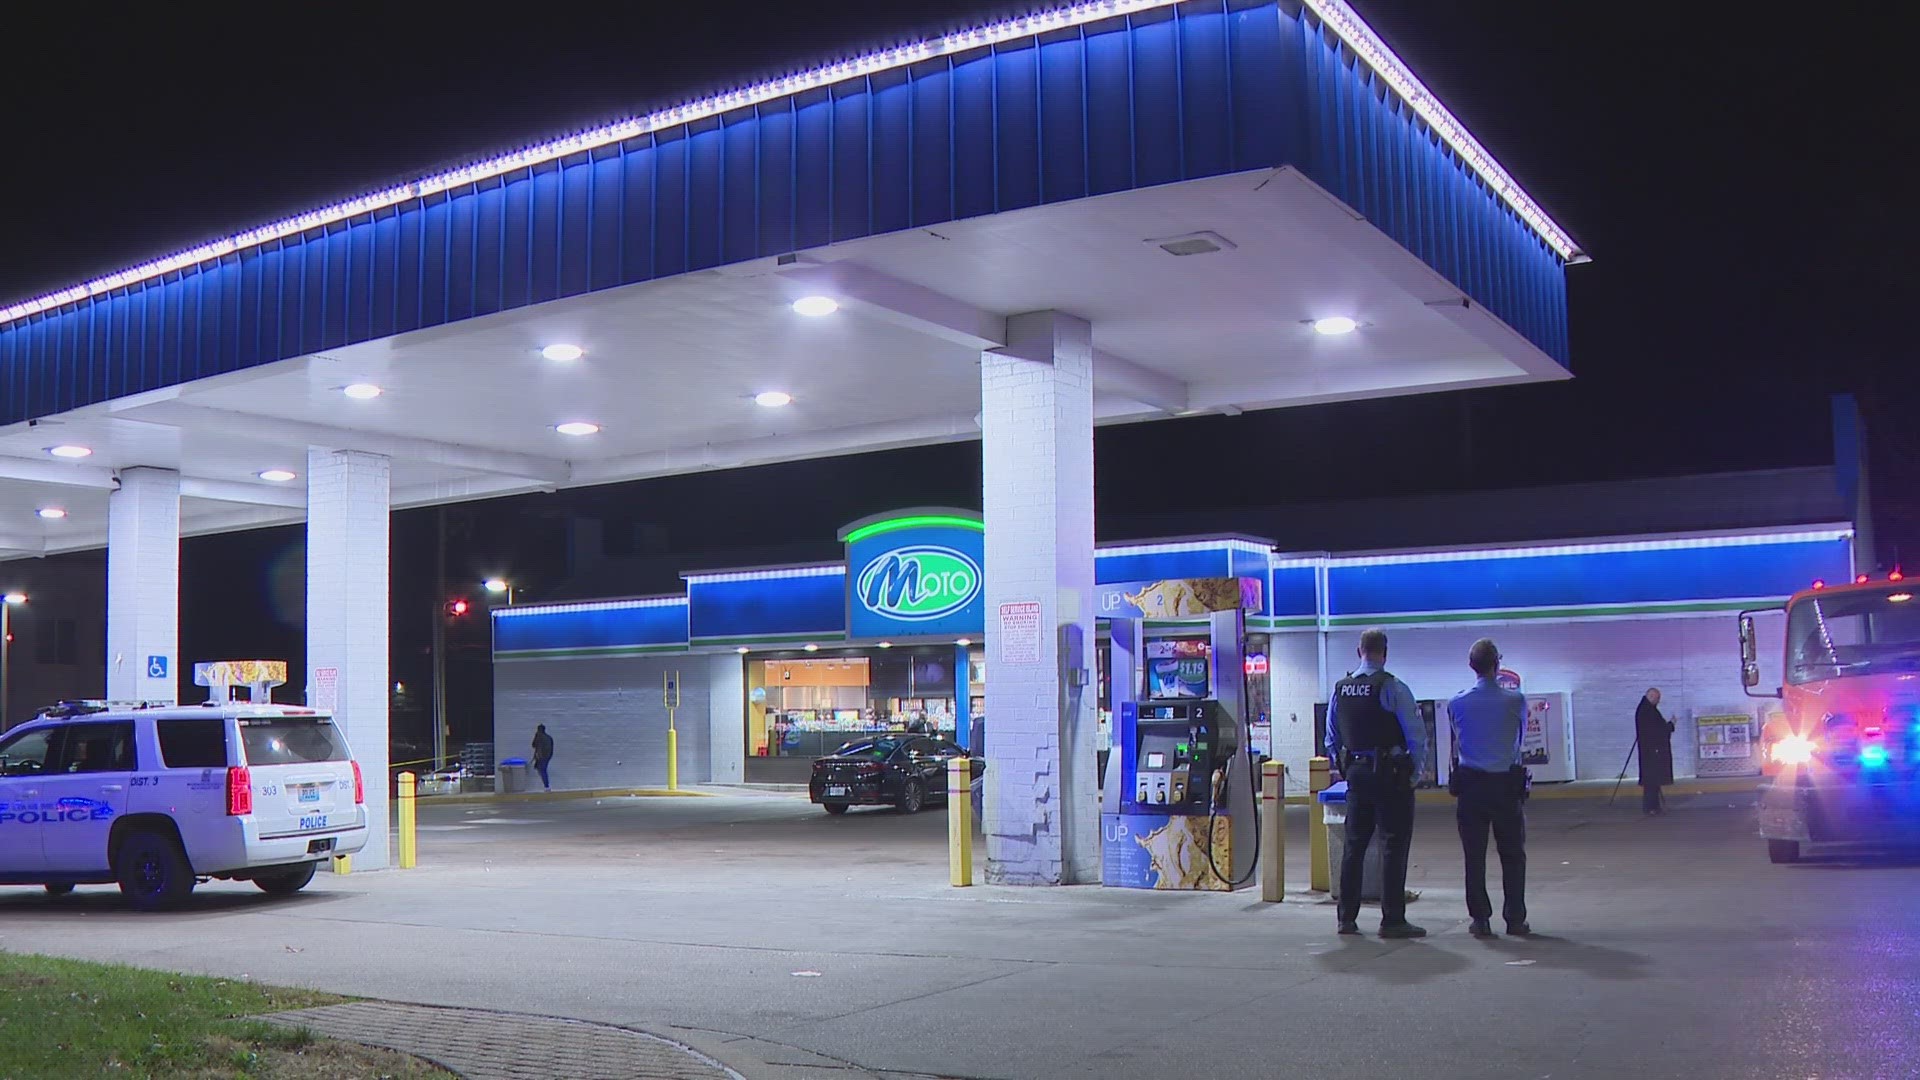 The deadly shooting happened at a gas station near the intersection of Chippewa Street and Jefferson Avenue.